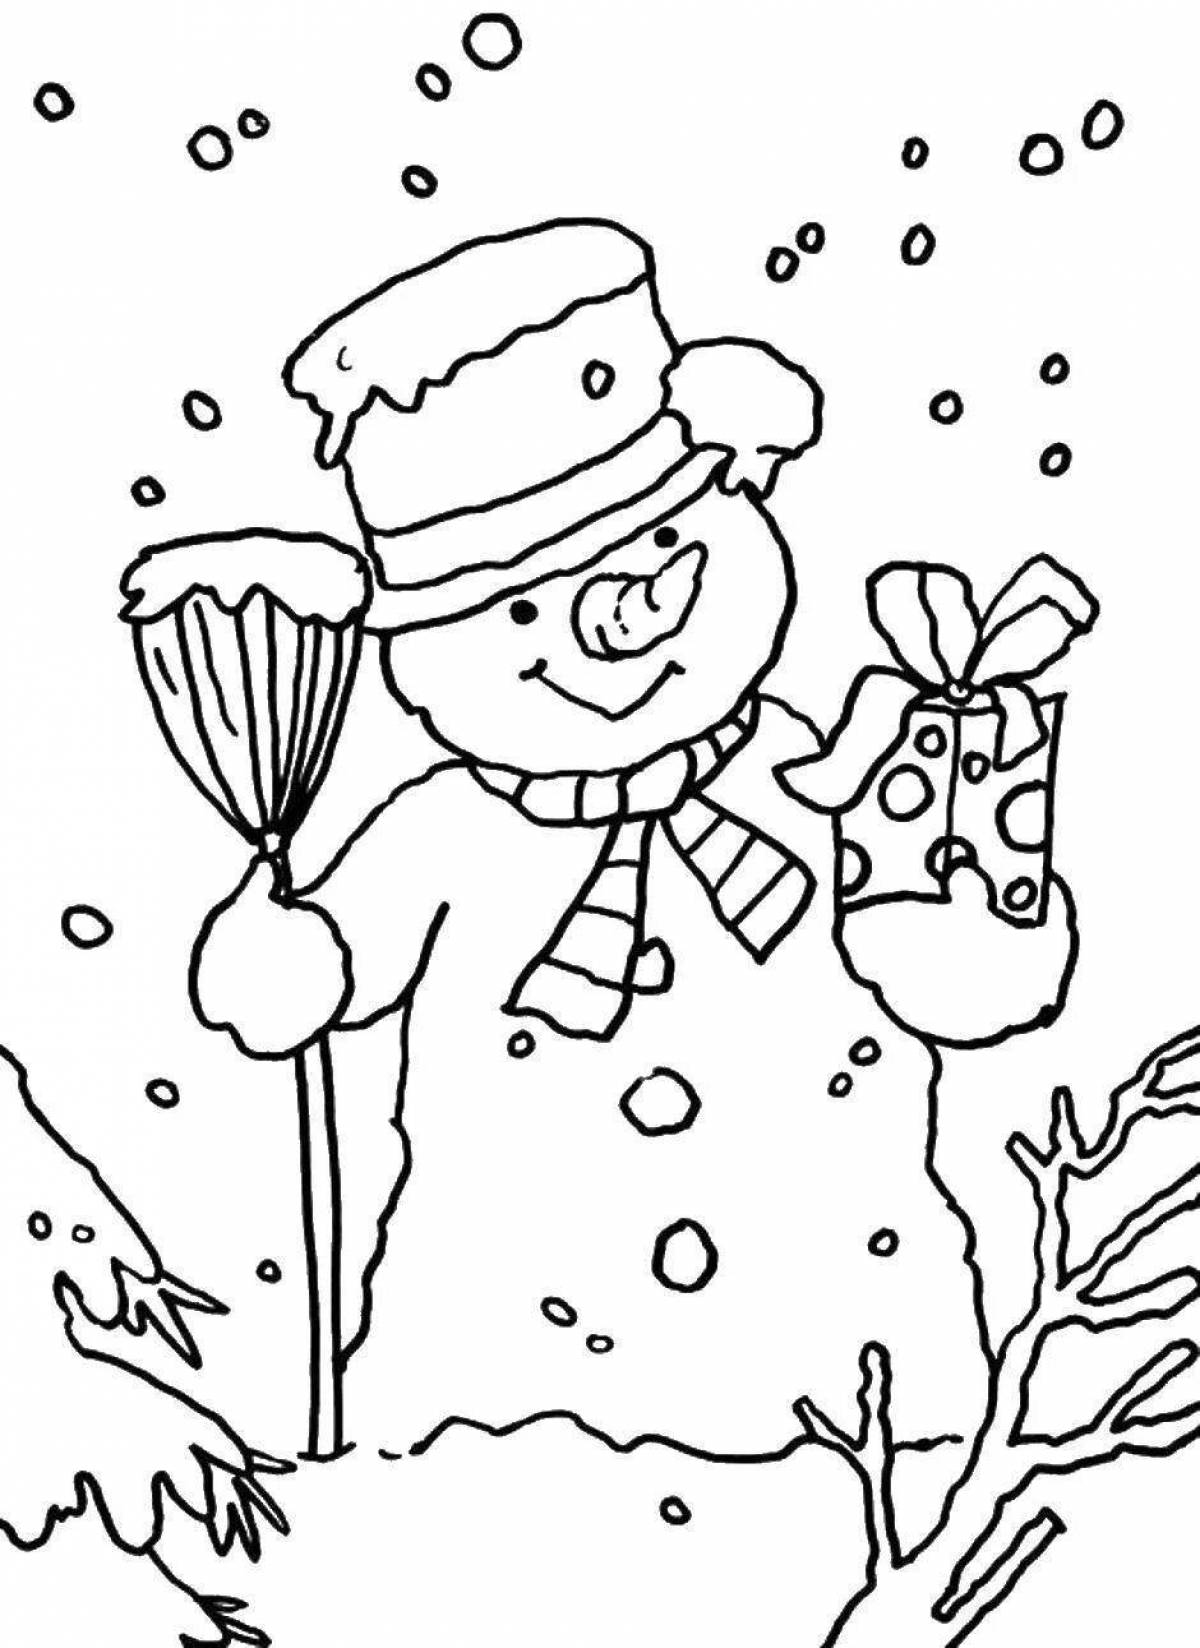 Exquisite snowman day coloring book